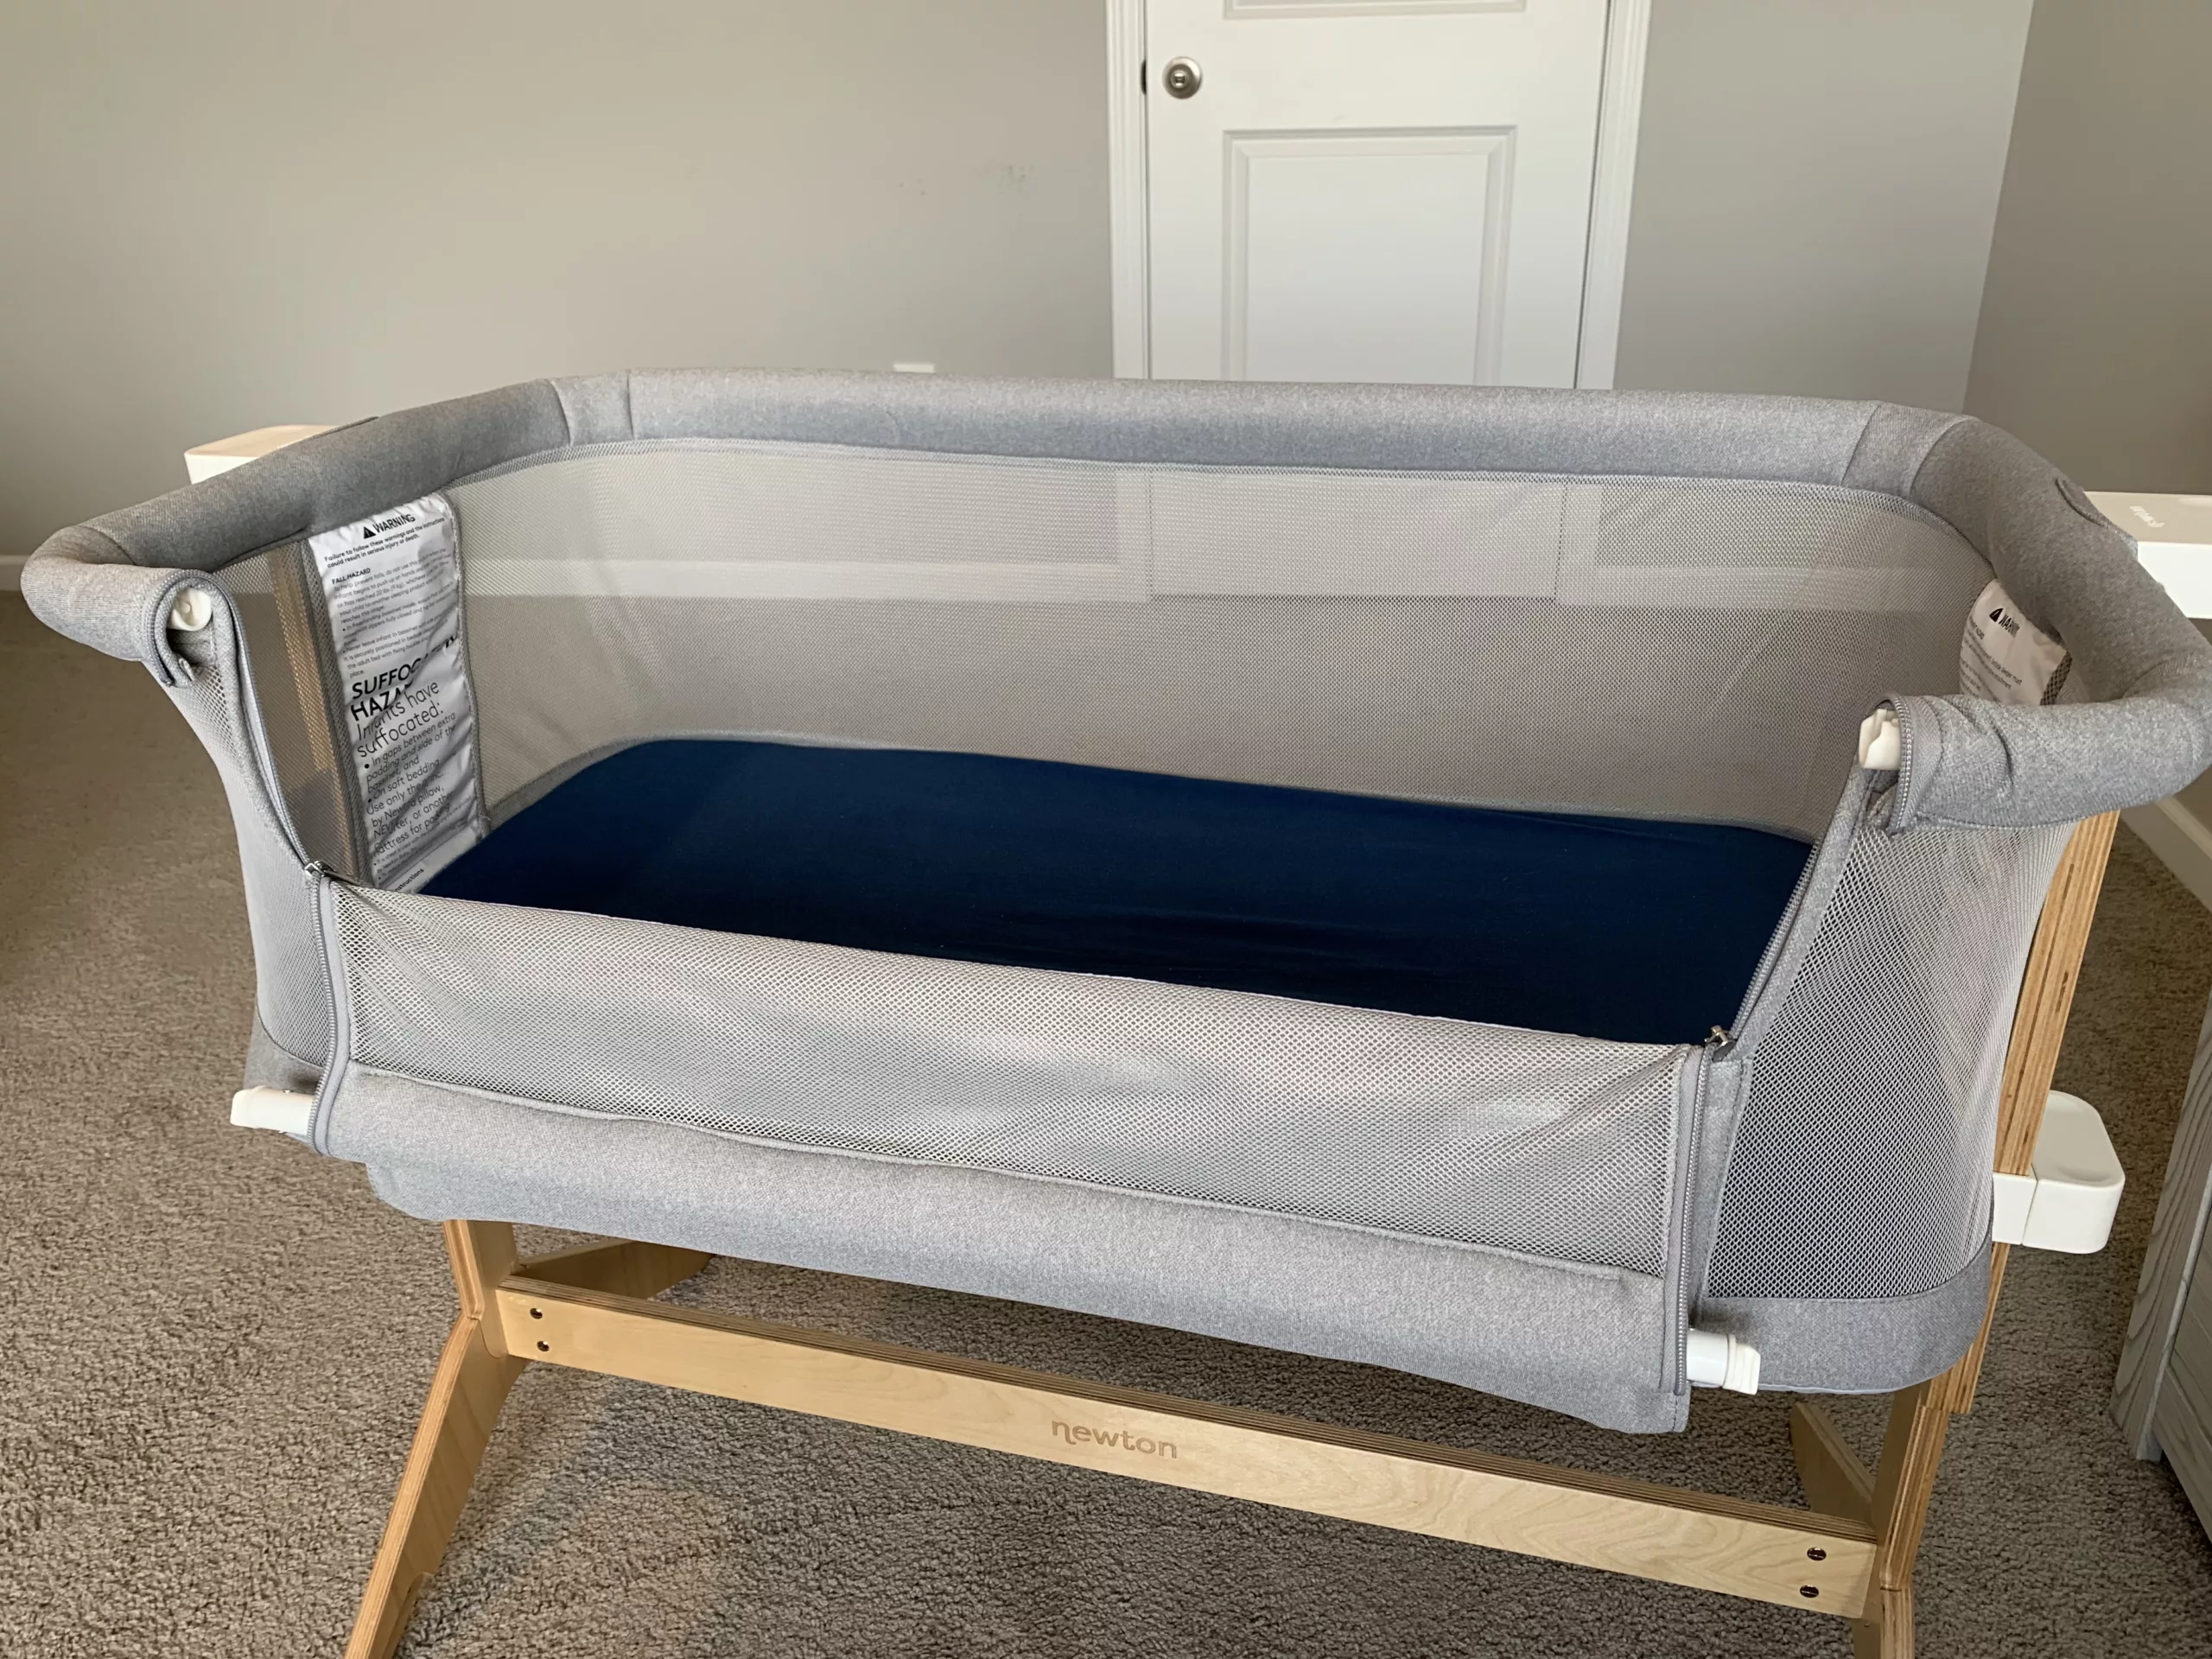 Side view of an empty Newton Baby Bassinet with blue sheets and the bedside sleeper wall rolled down.